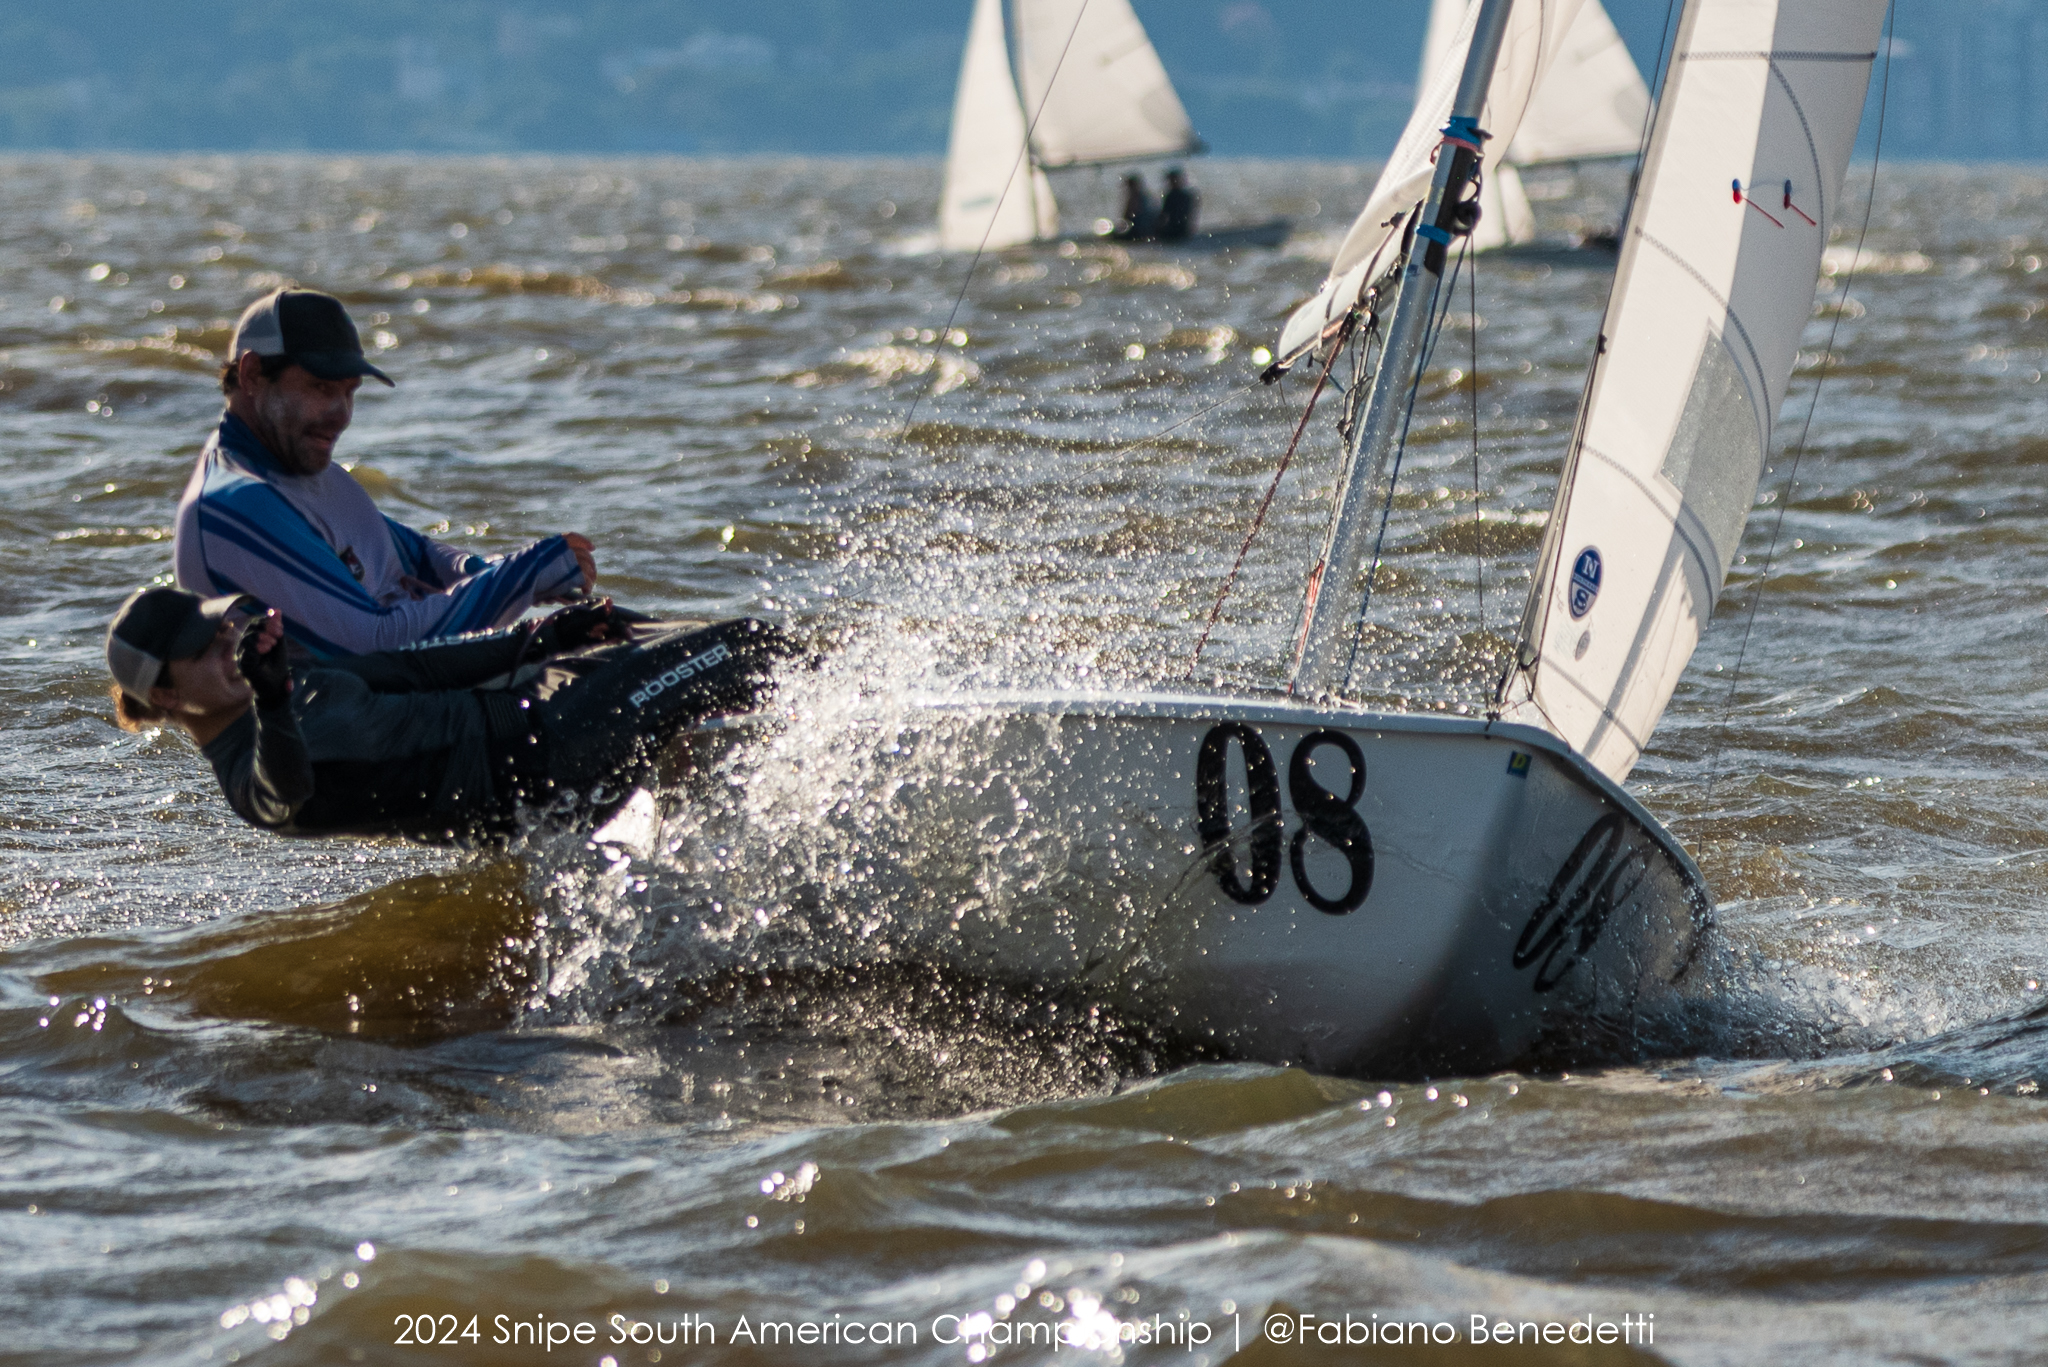 South American Championship – Final Image